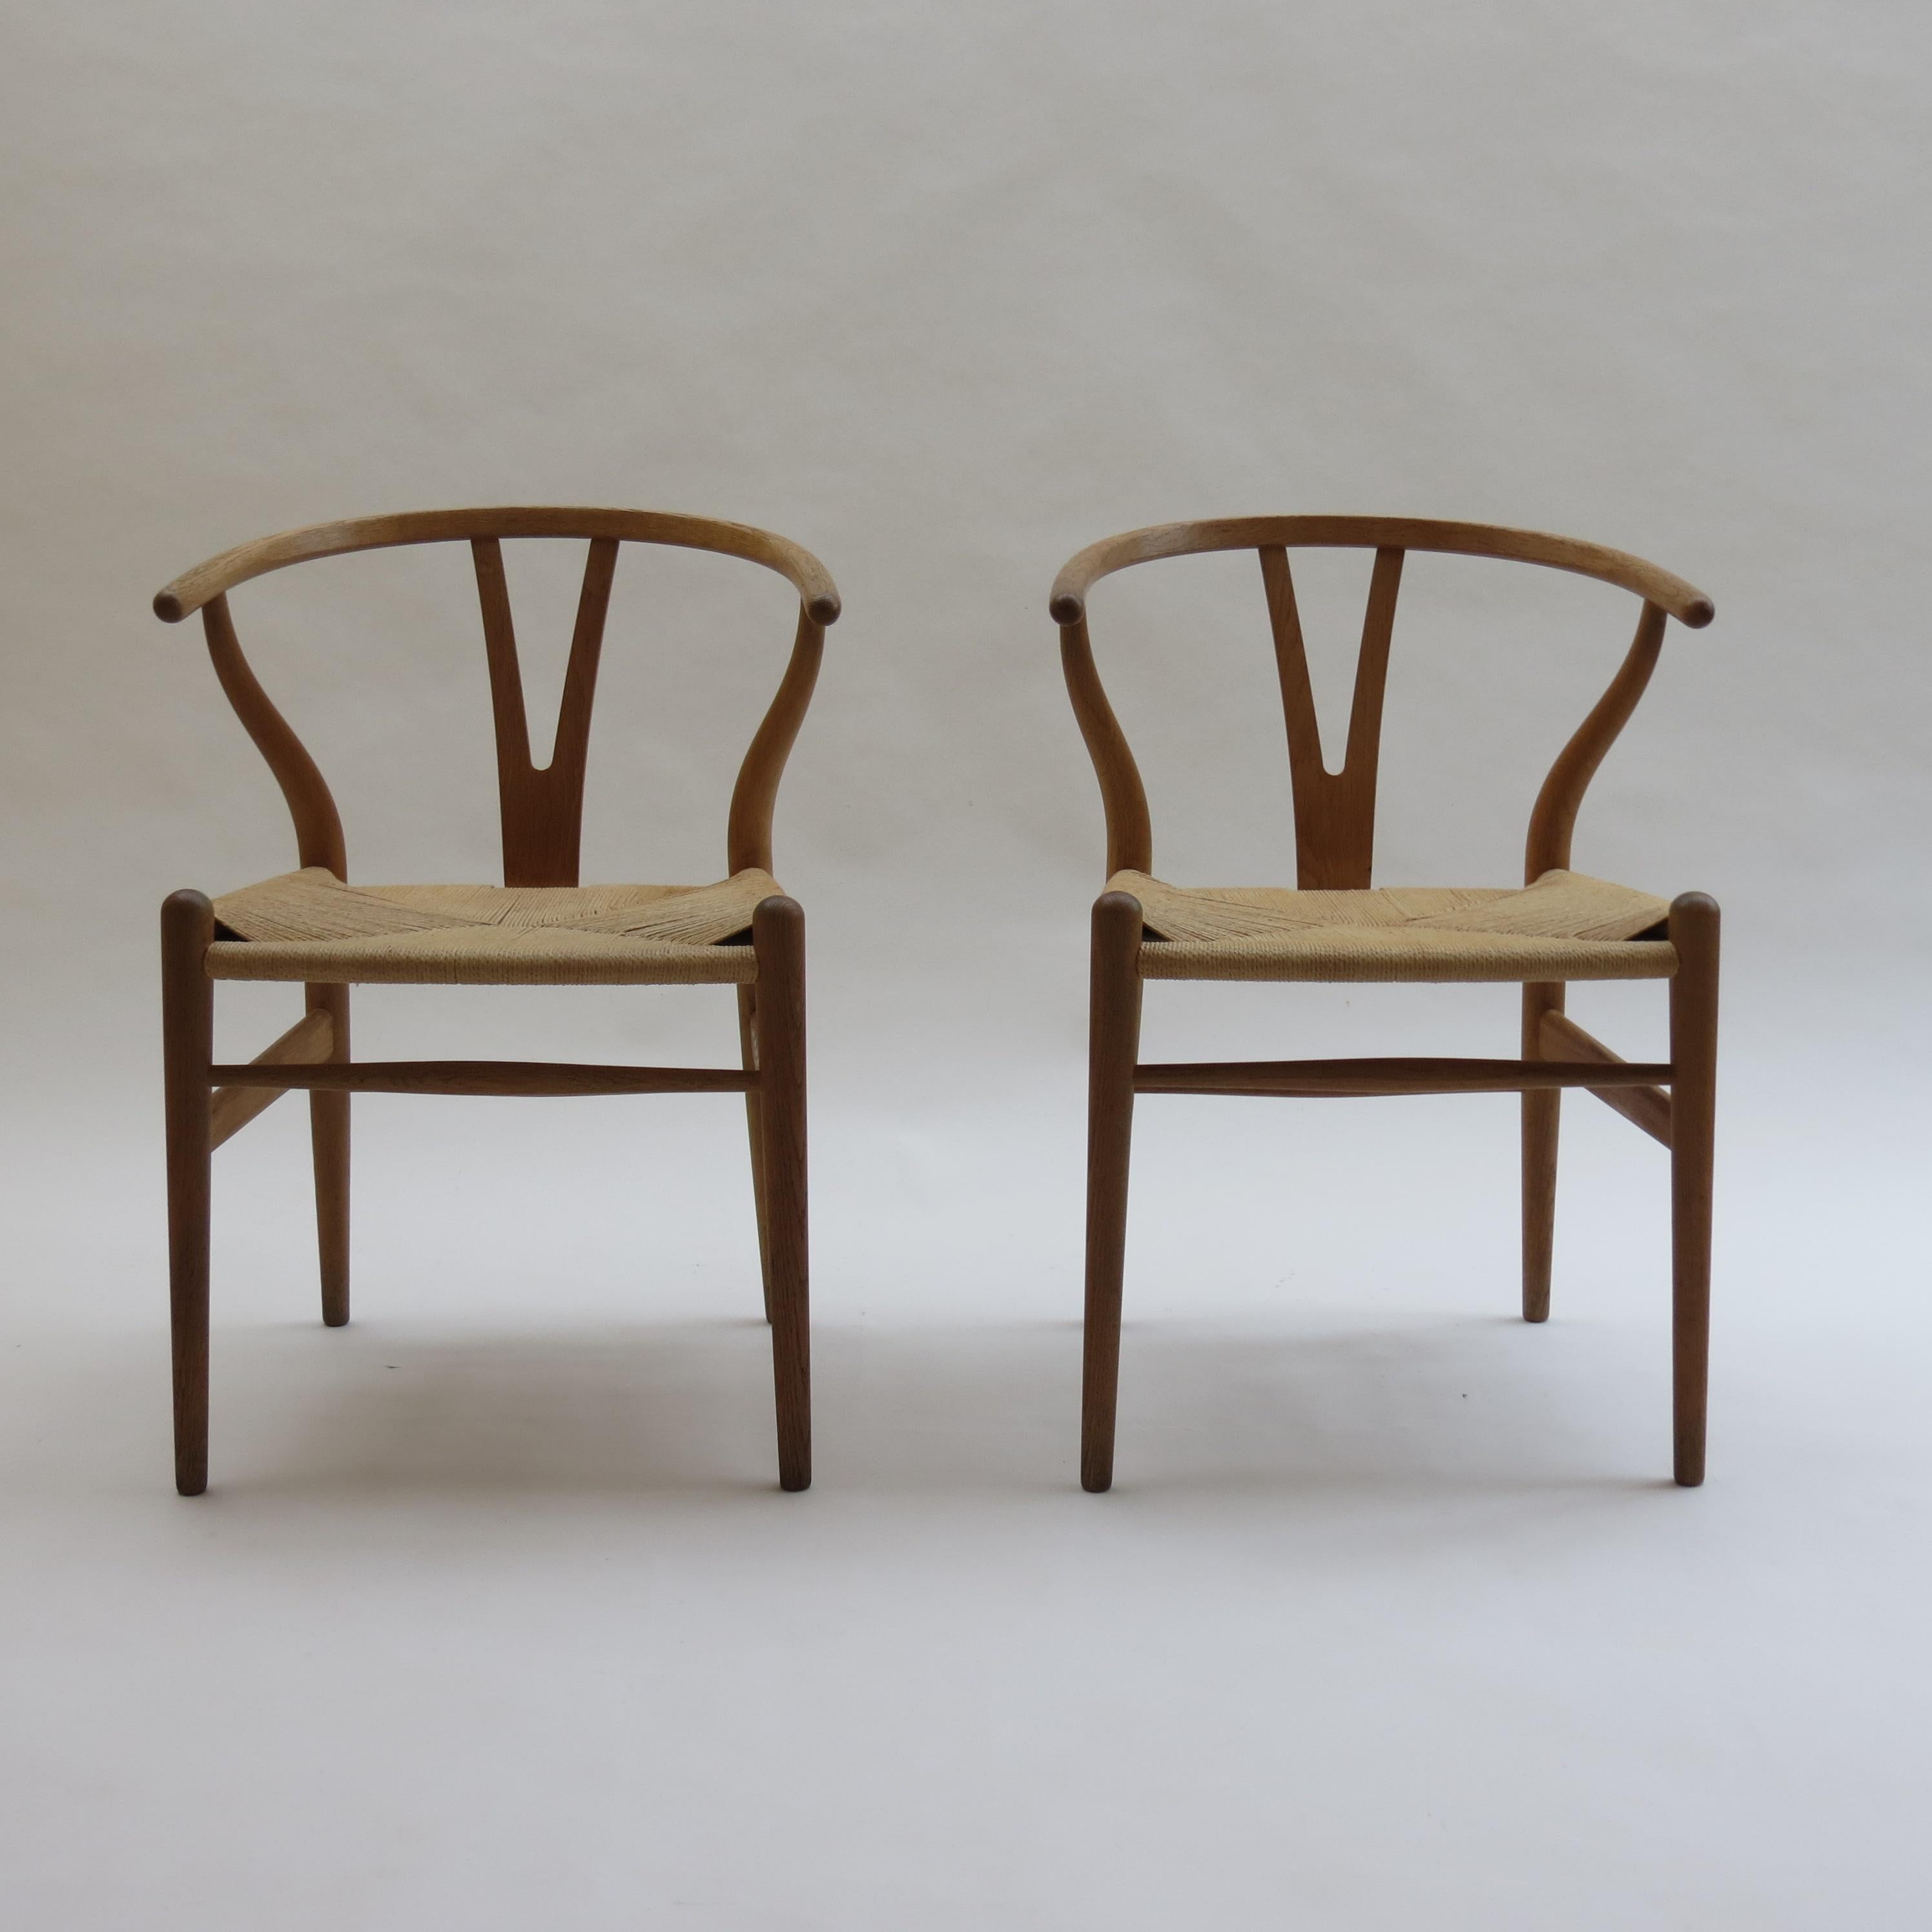 Pair of vintage original wishbone chairs, designed by Hans J Wegner and manufactured by Carl Hansen, Denmark.

Made from solid oak with original oiled finish. Paper cord seat.

Both chairs retain original paper label to the underside.

In good